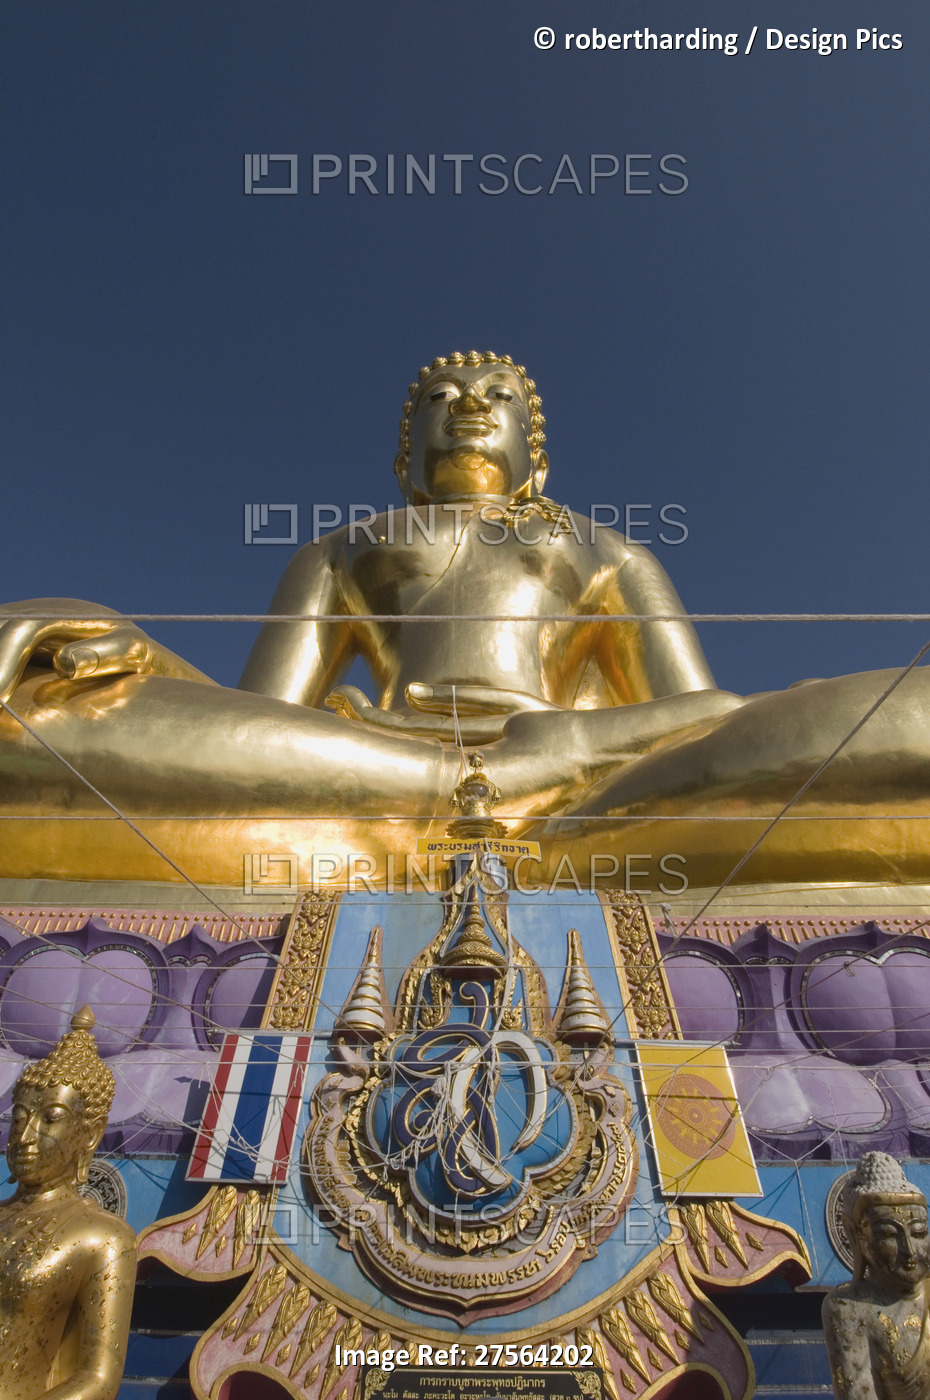 Huge golden Buddha on the banks of the Mekong River at Sop Ruak, Thailand, ...